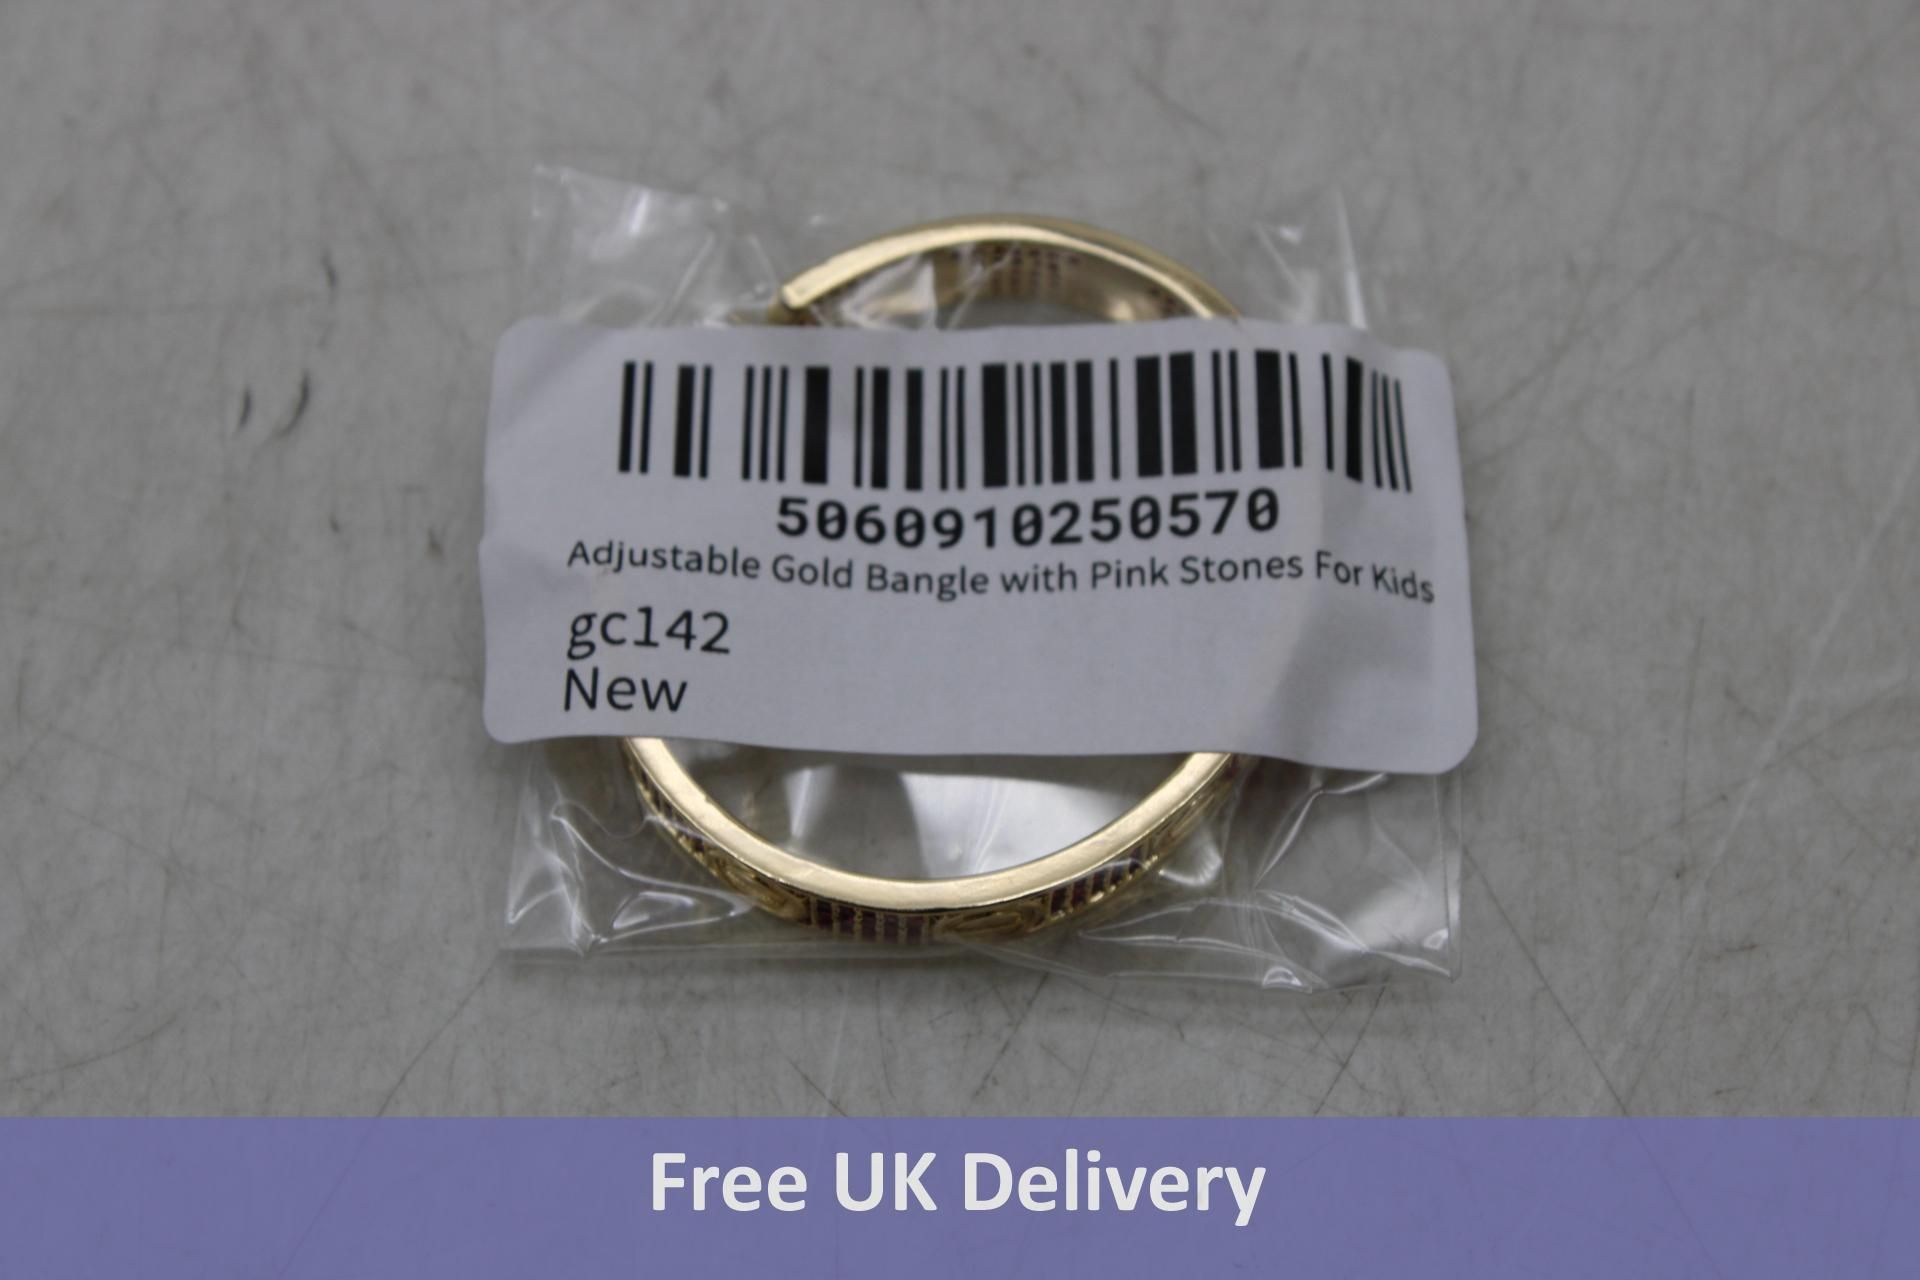 Four Adjustable Kids Bangles with Pink Stones, Gold Colour, GC142 - Image 3 of 4